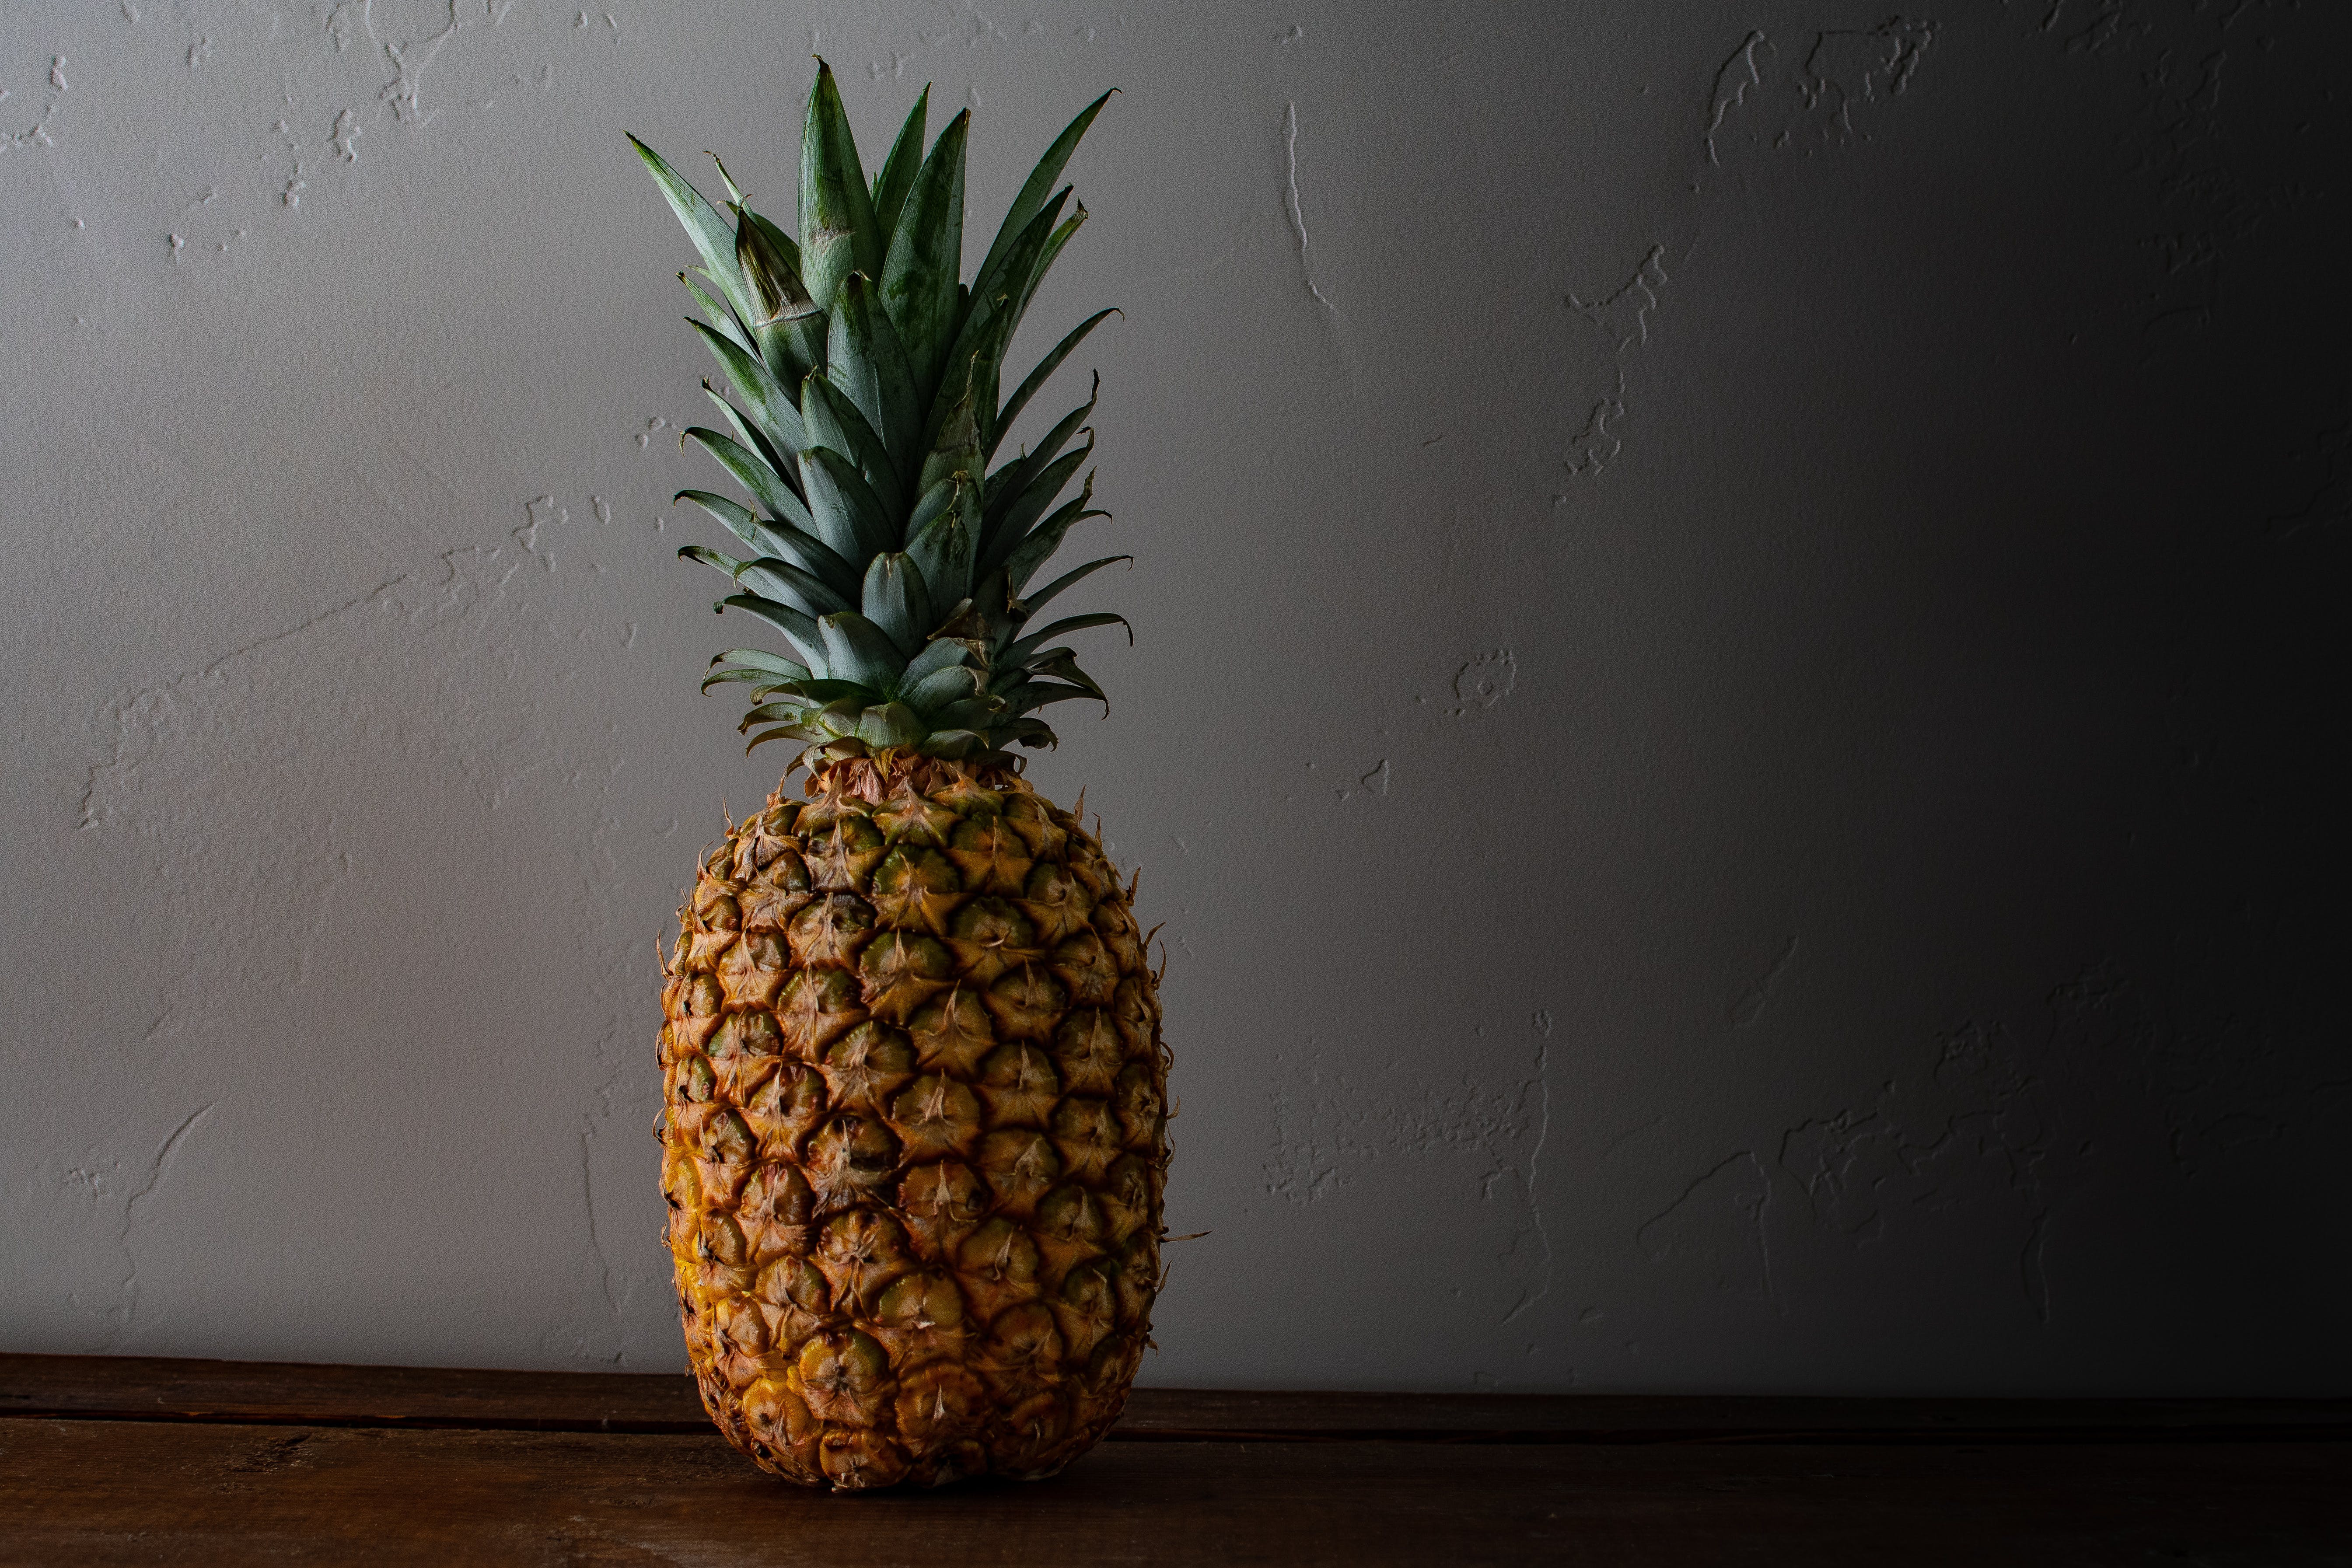 What is the main benefit of eating pineapple?